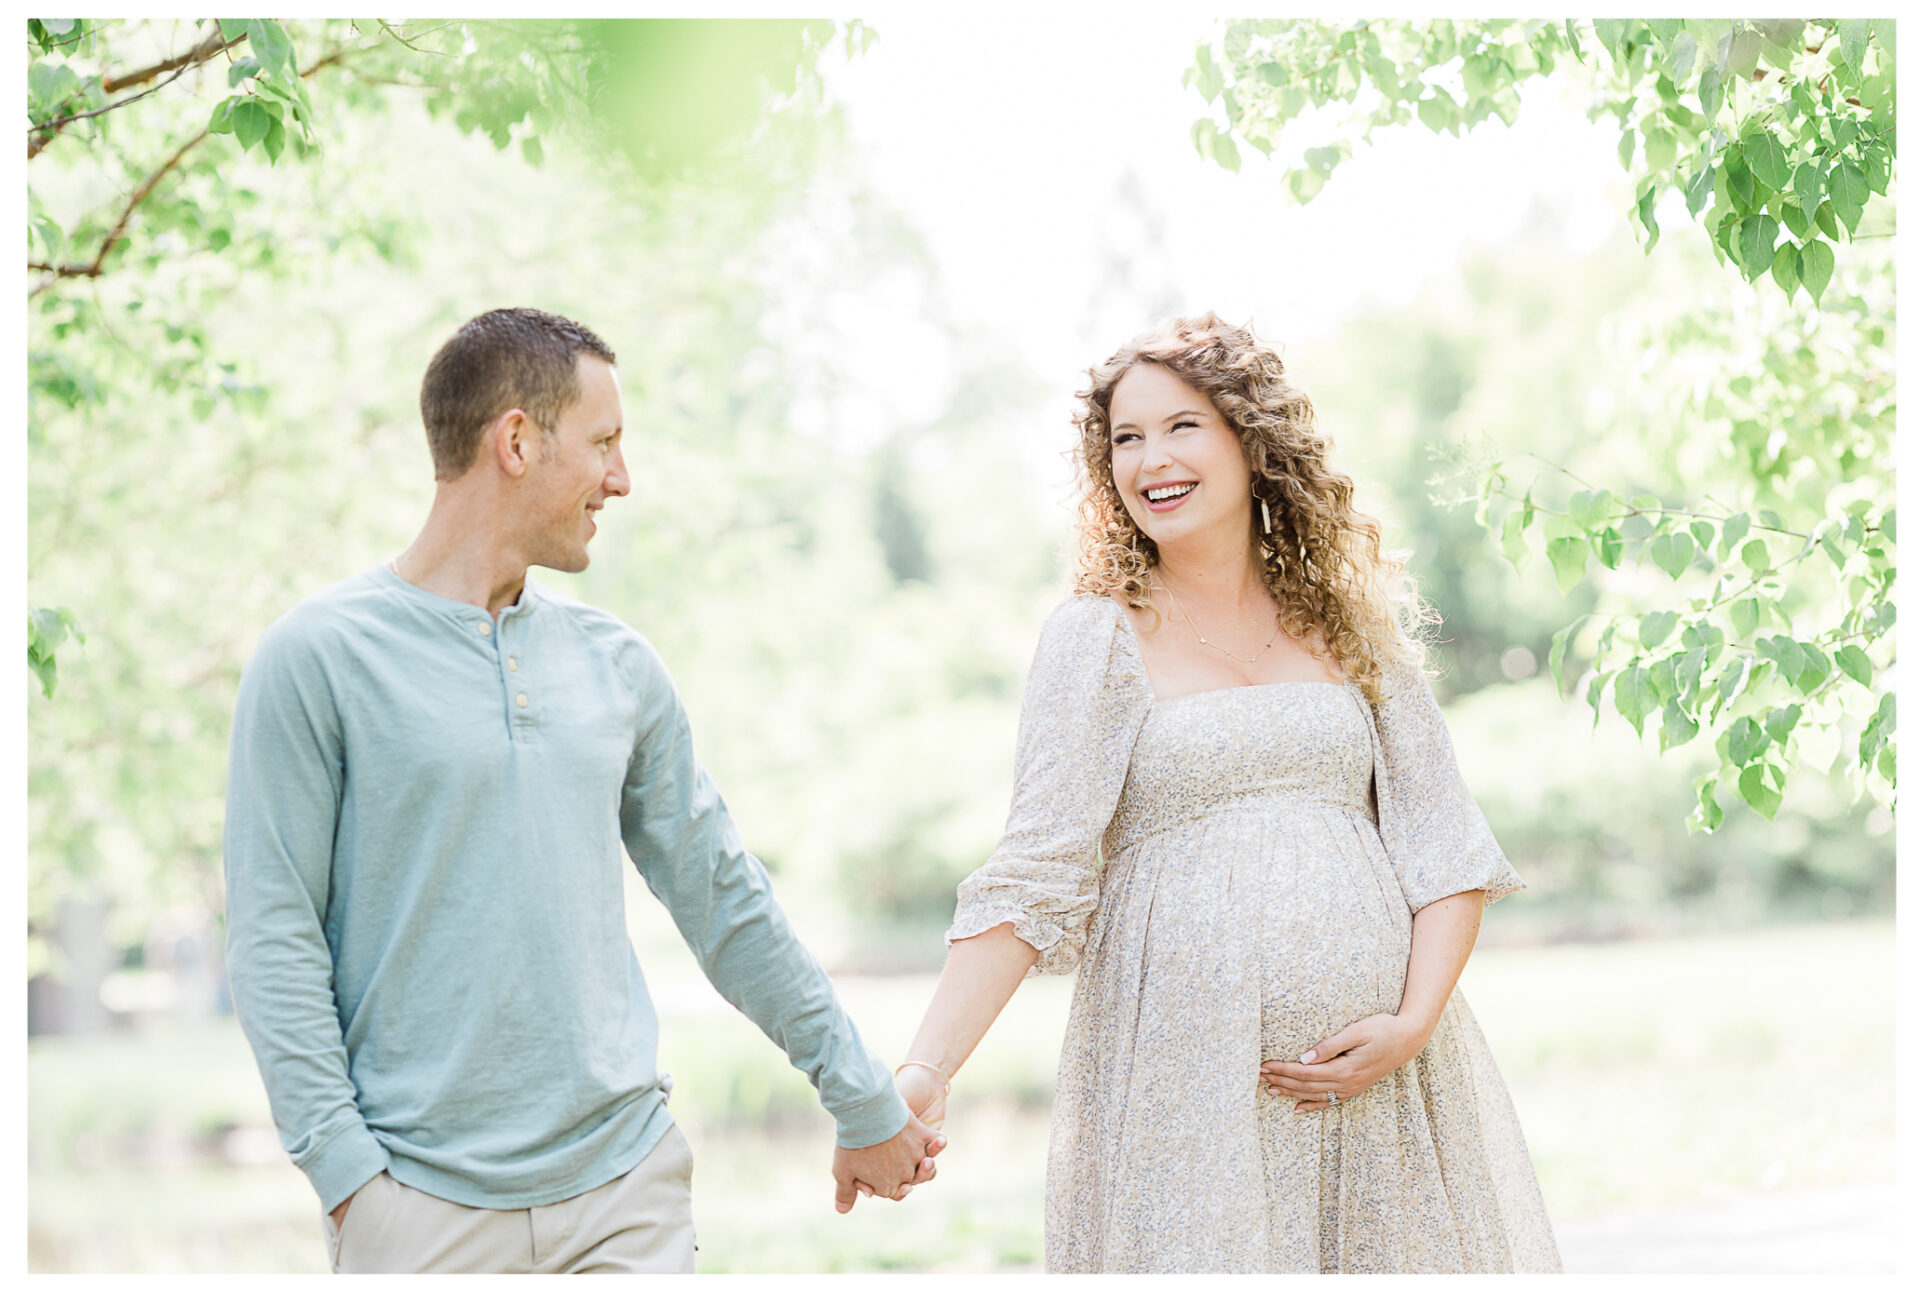 Winter Freire Photography | husband and wife standing on a path holding hands and smiling together during their outdoor maternity session